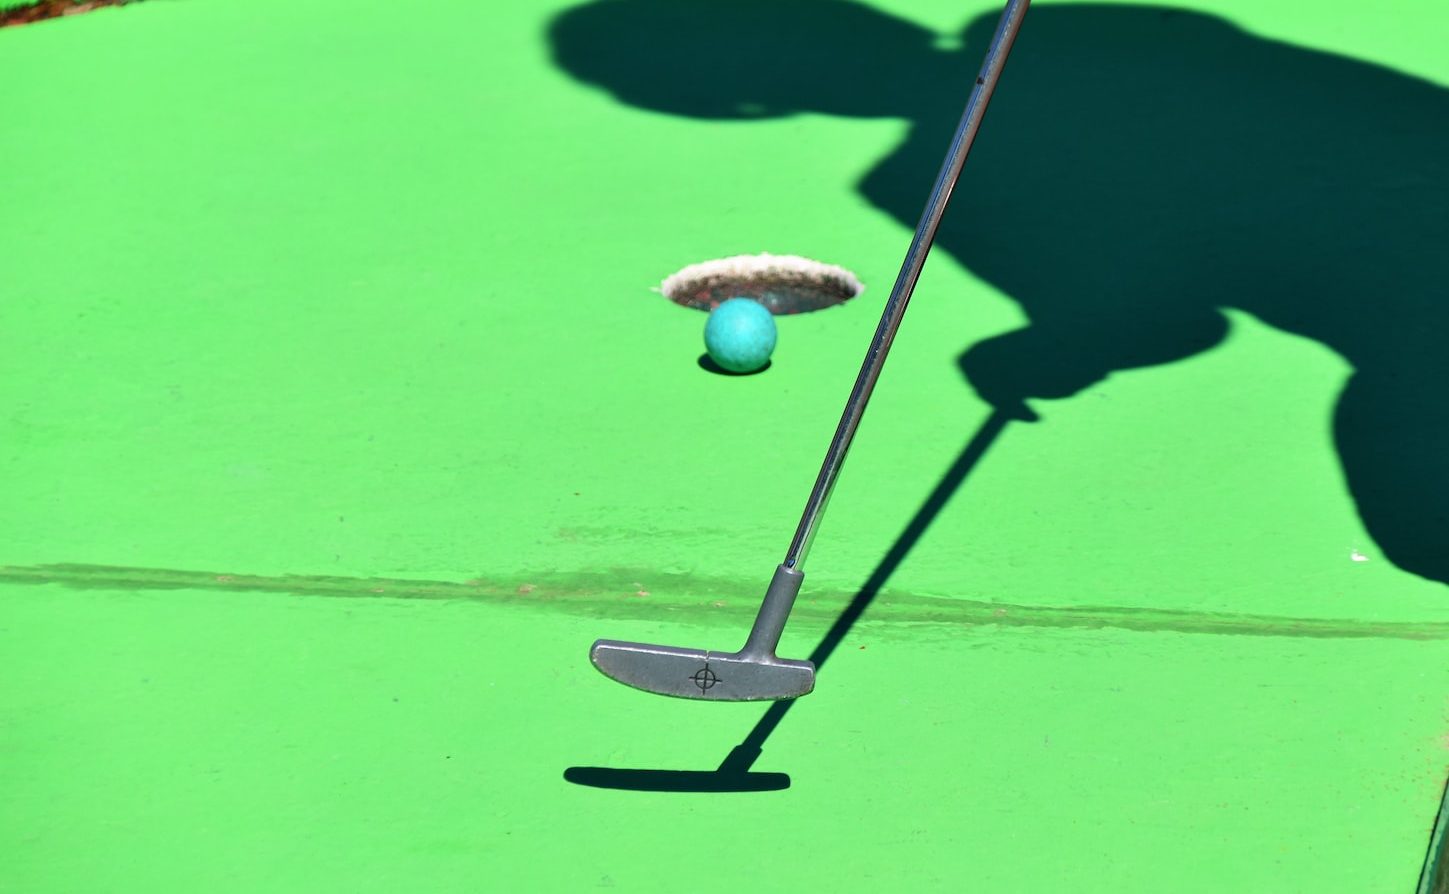 person golfing and ball about to shoot in hole